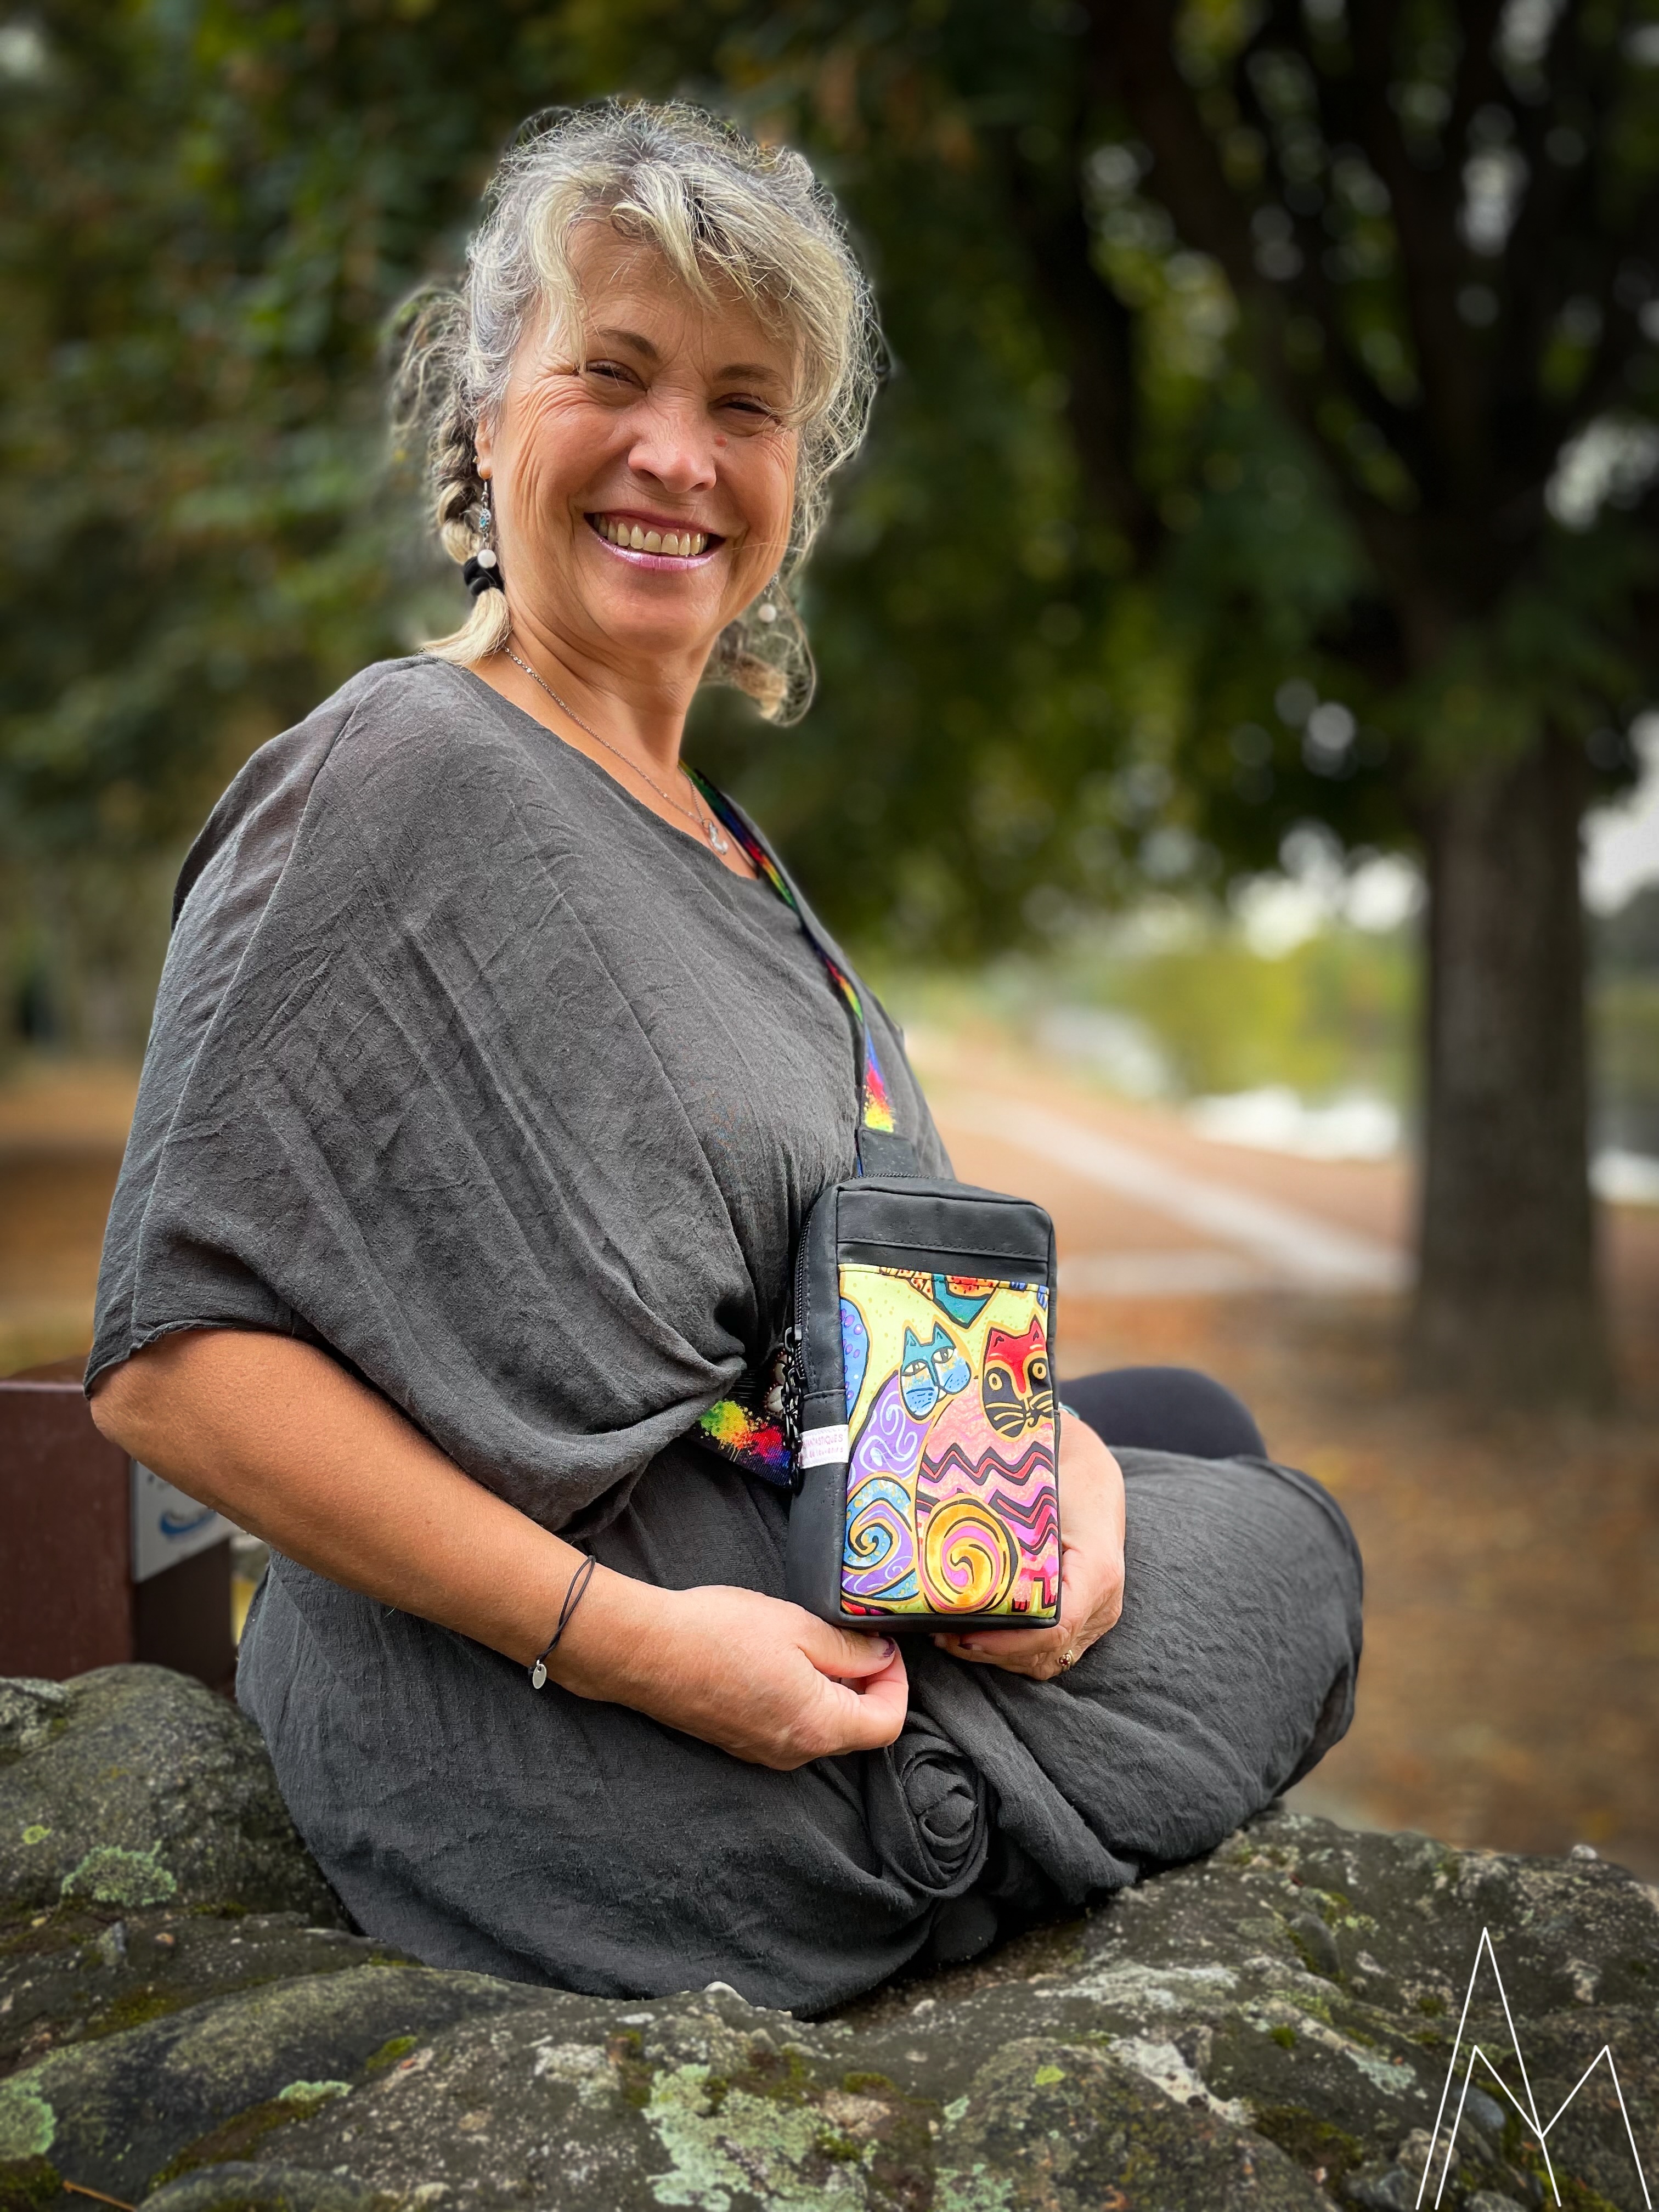 Photo of a mature woman carrying a small backpack in black and a colorful cat pattern, in an outdoor park during the day.